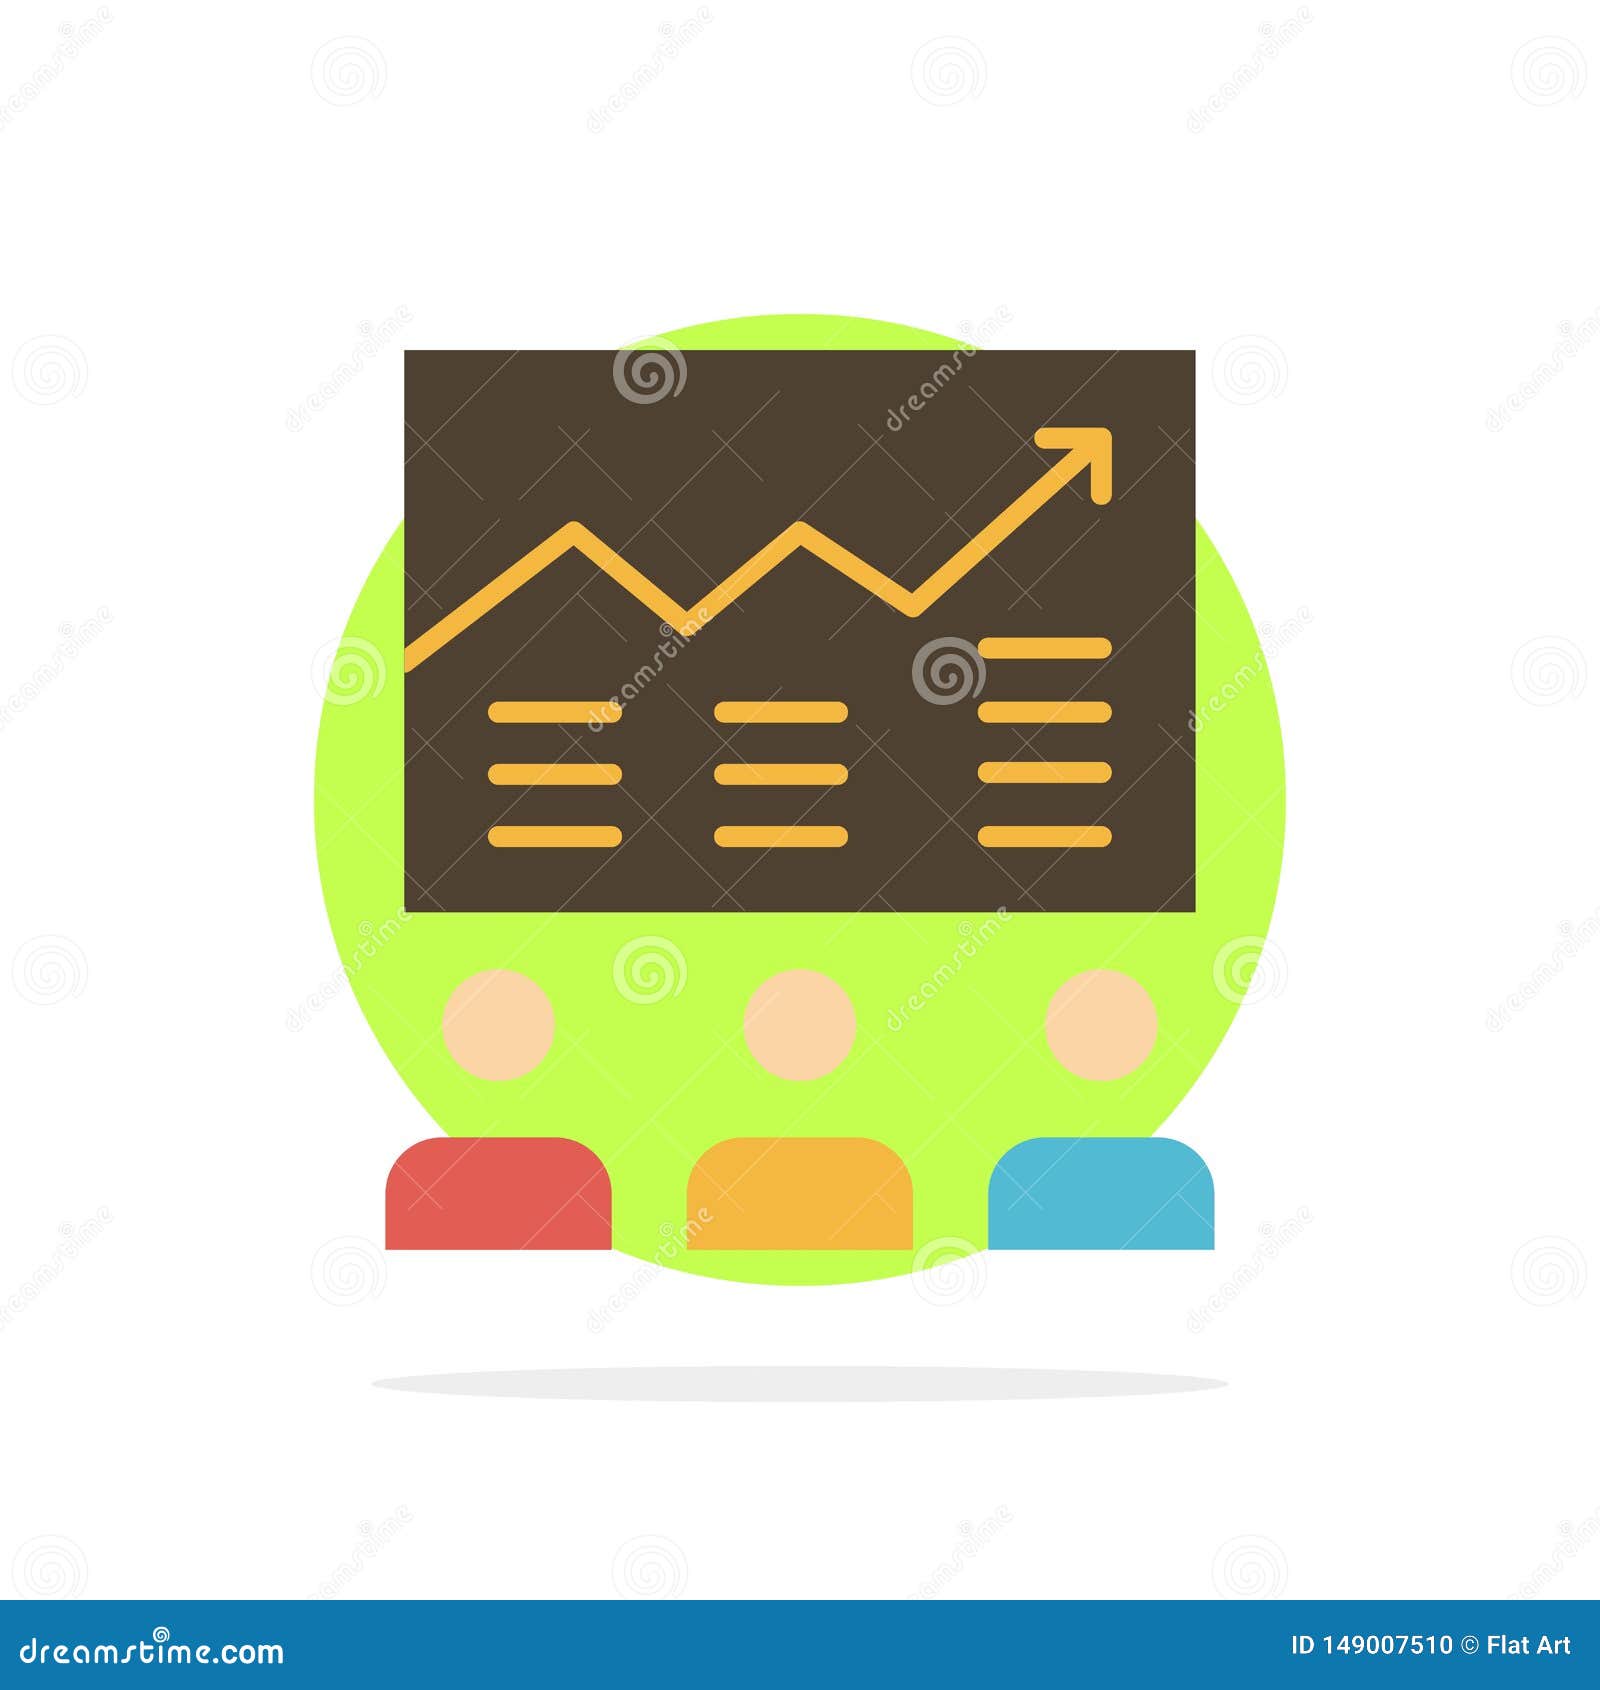 team, arrow, business, chart, efforts, graph, success abstract circle background flat color icon